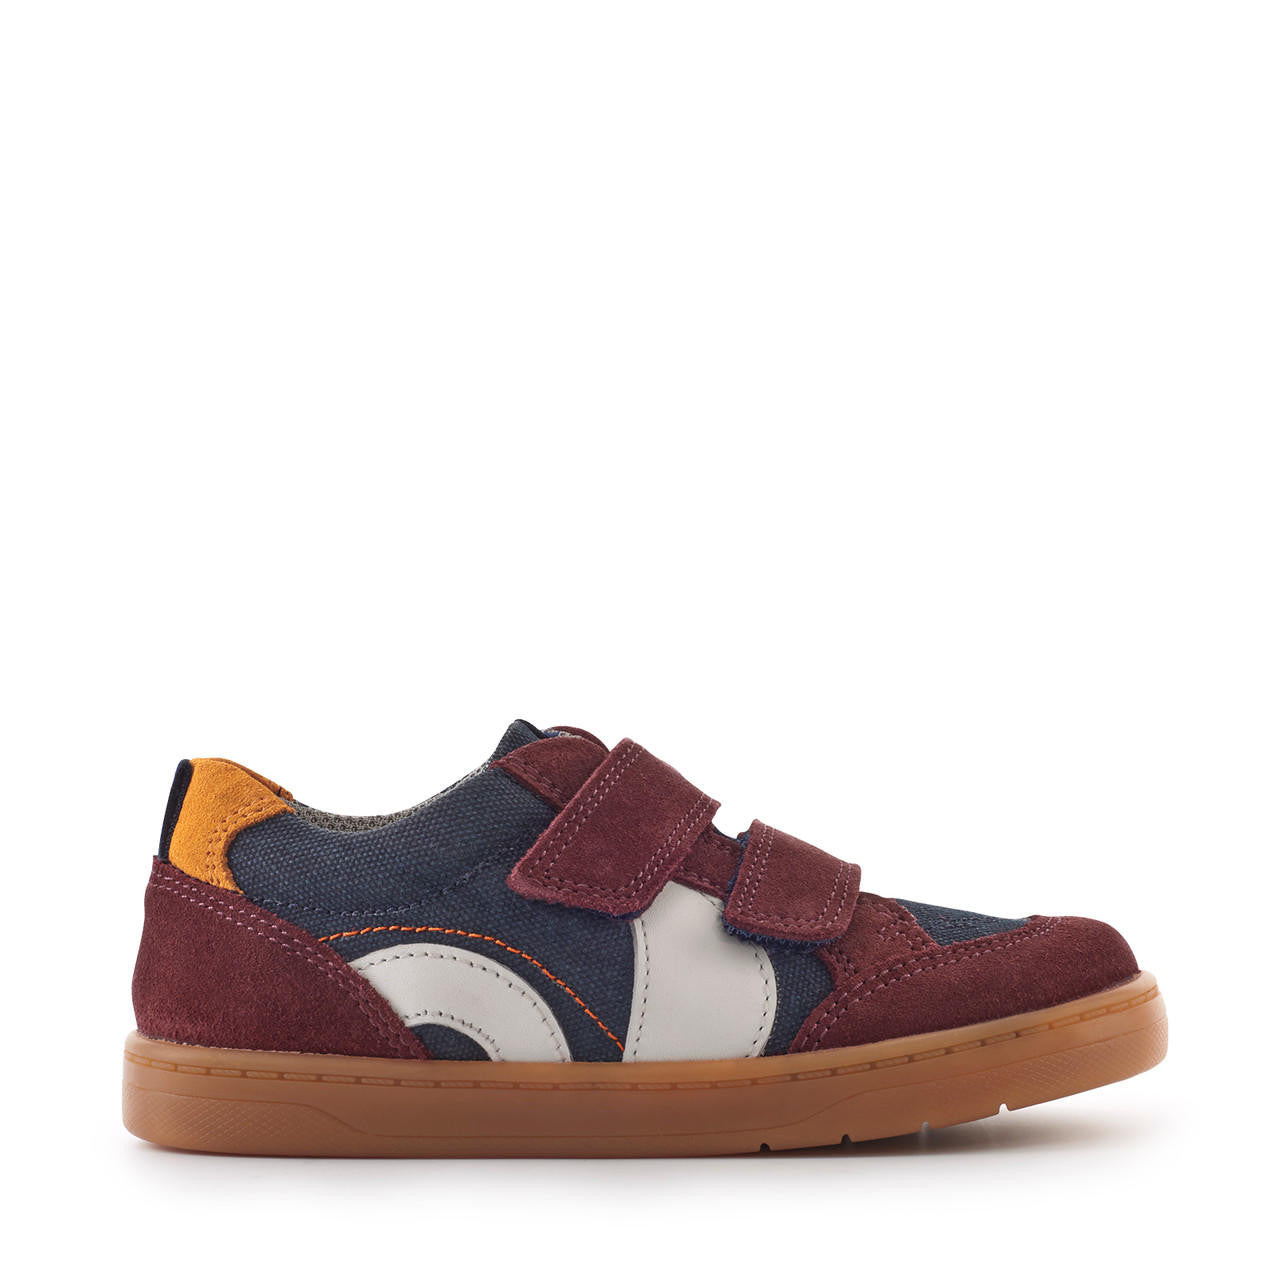 A boys casual shoe by Start-Rite, style is Enigma in wine and navy suede and canvas with double velcro fastening. Right side view.